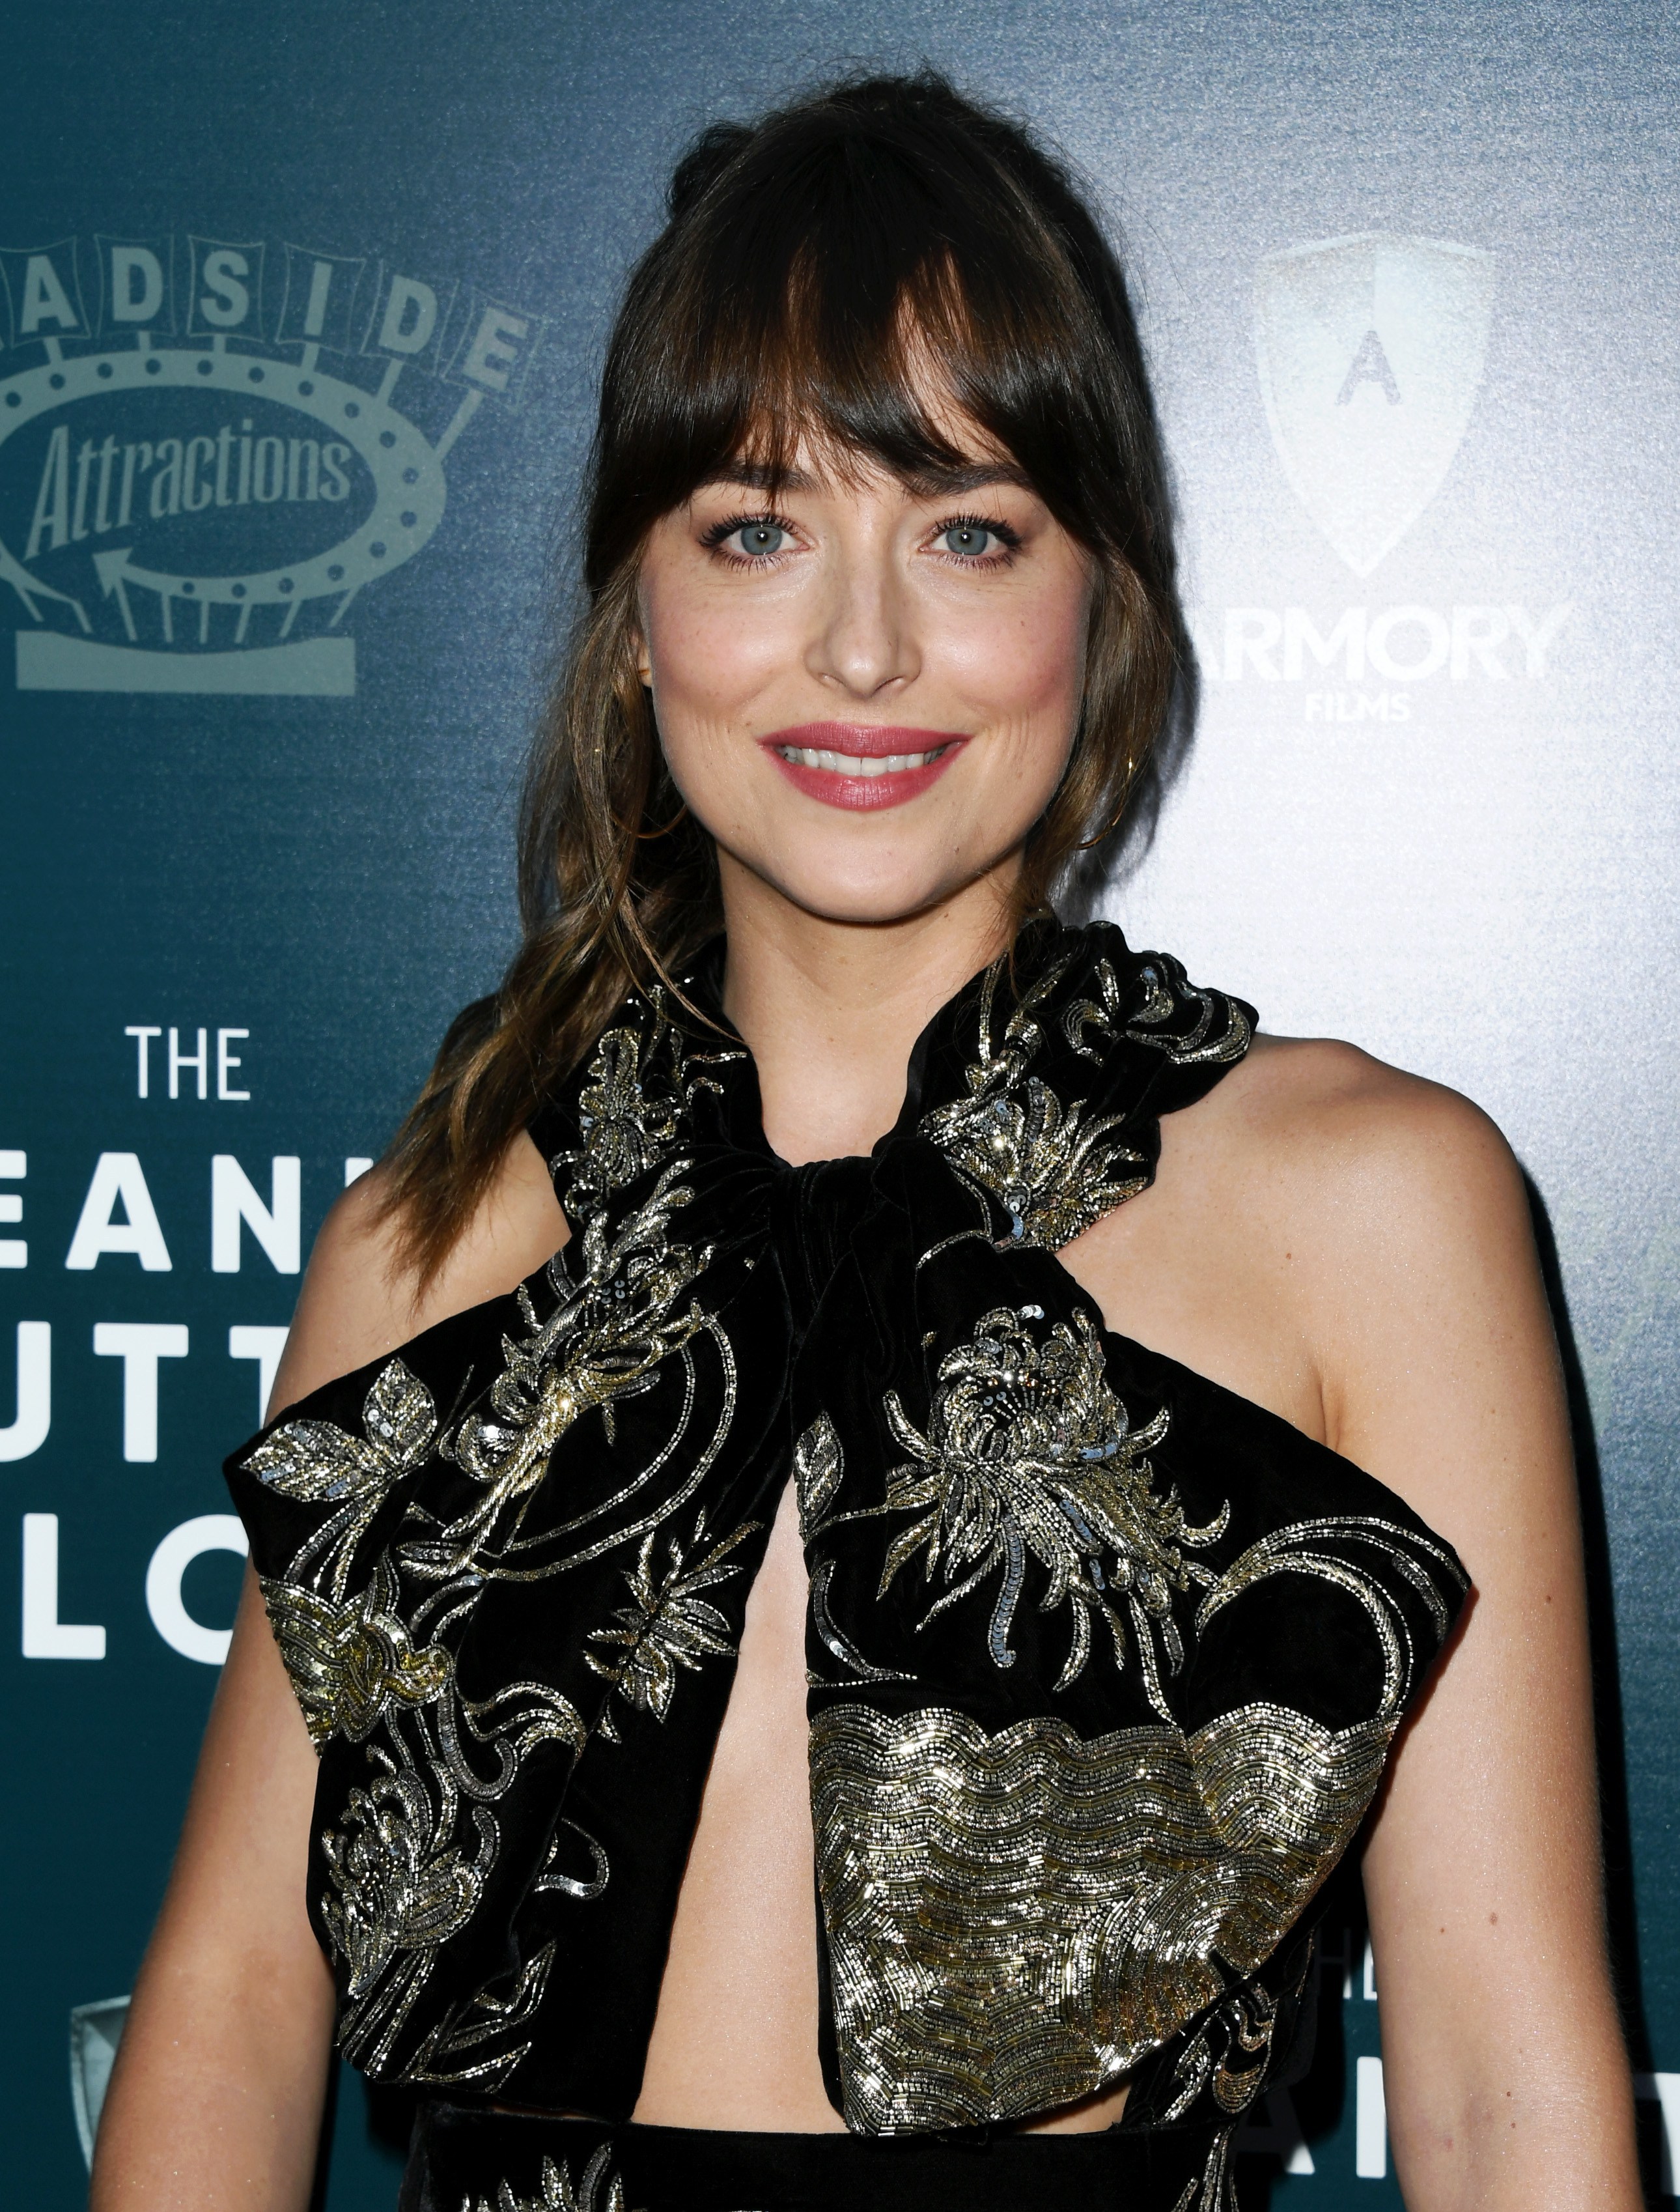 Dakota Johnson reveals she lied about loving limes – and is actually allergic